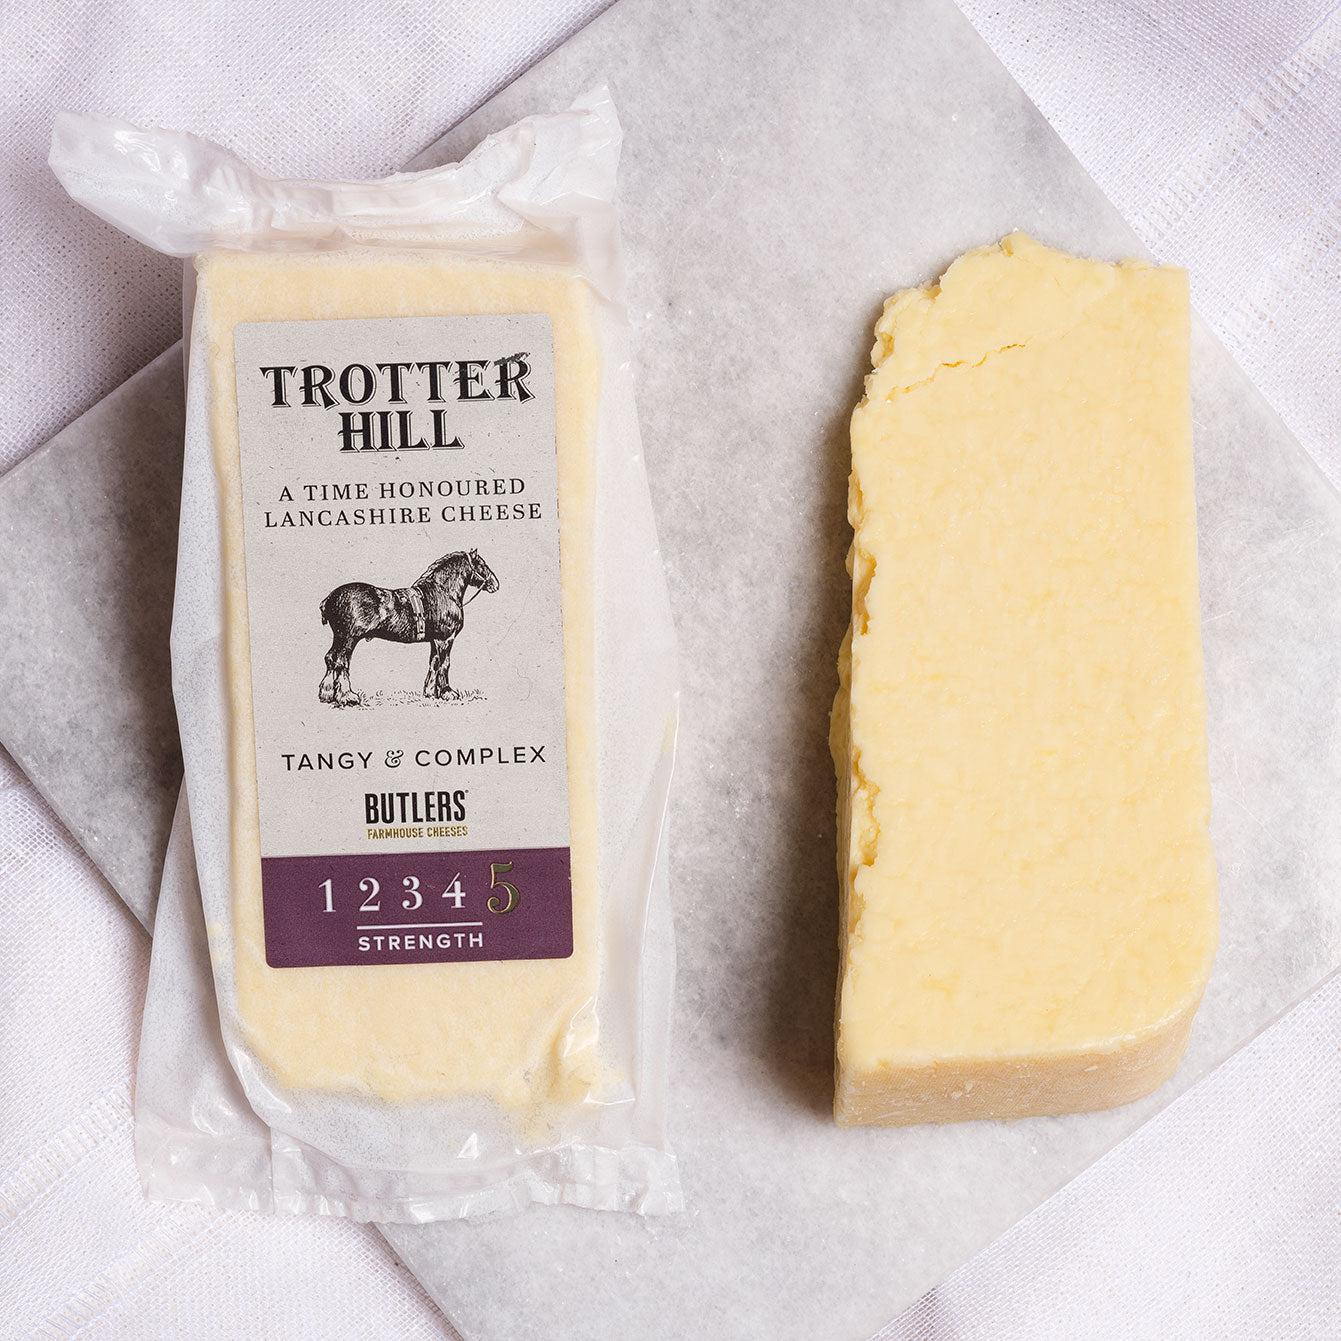 Trotter Hill a Handmade Lancashire Cheese in it's packaging and also as a wedge. Available from the Butler's Cheese Store.